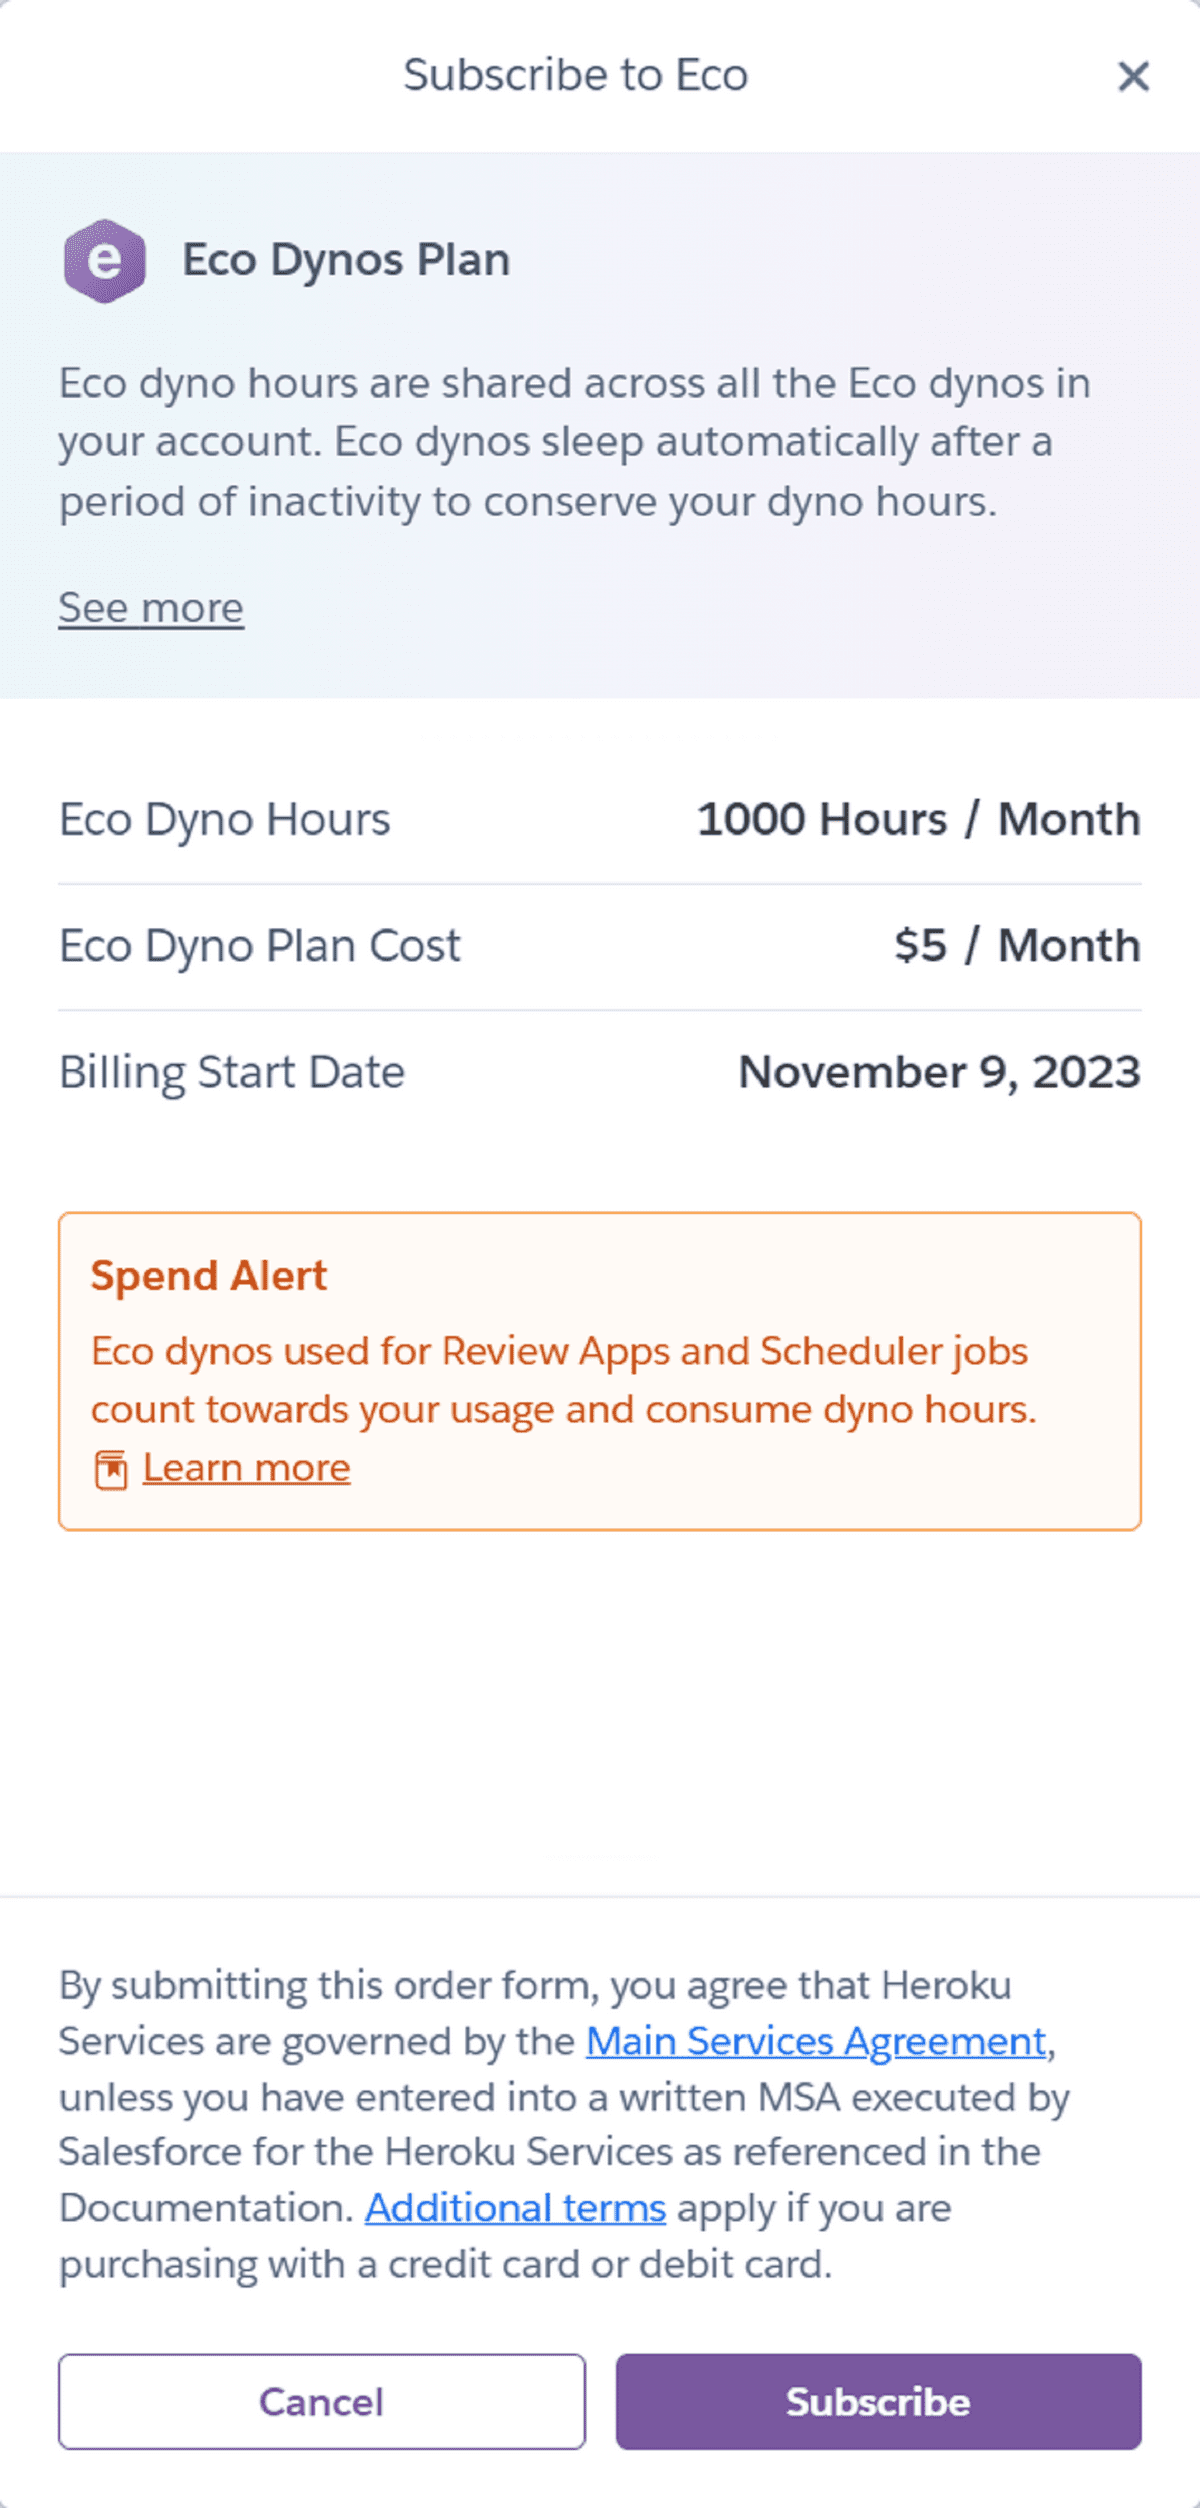 "Subscribe to Eco" modal with "Subscribe" button and Eco Dynos description: 1,000 Hours / Month, $5 / Month.